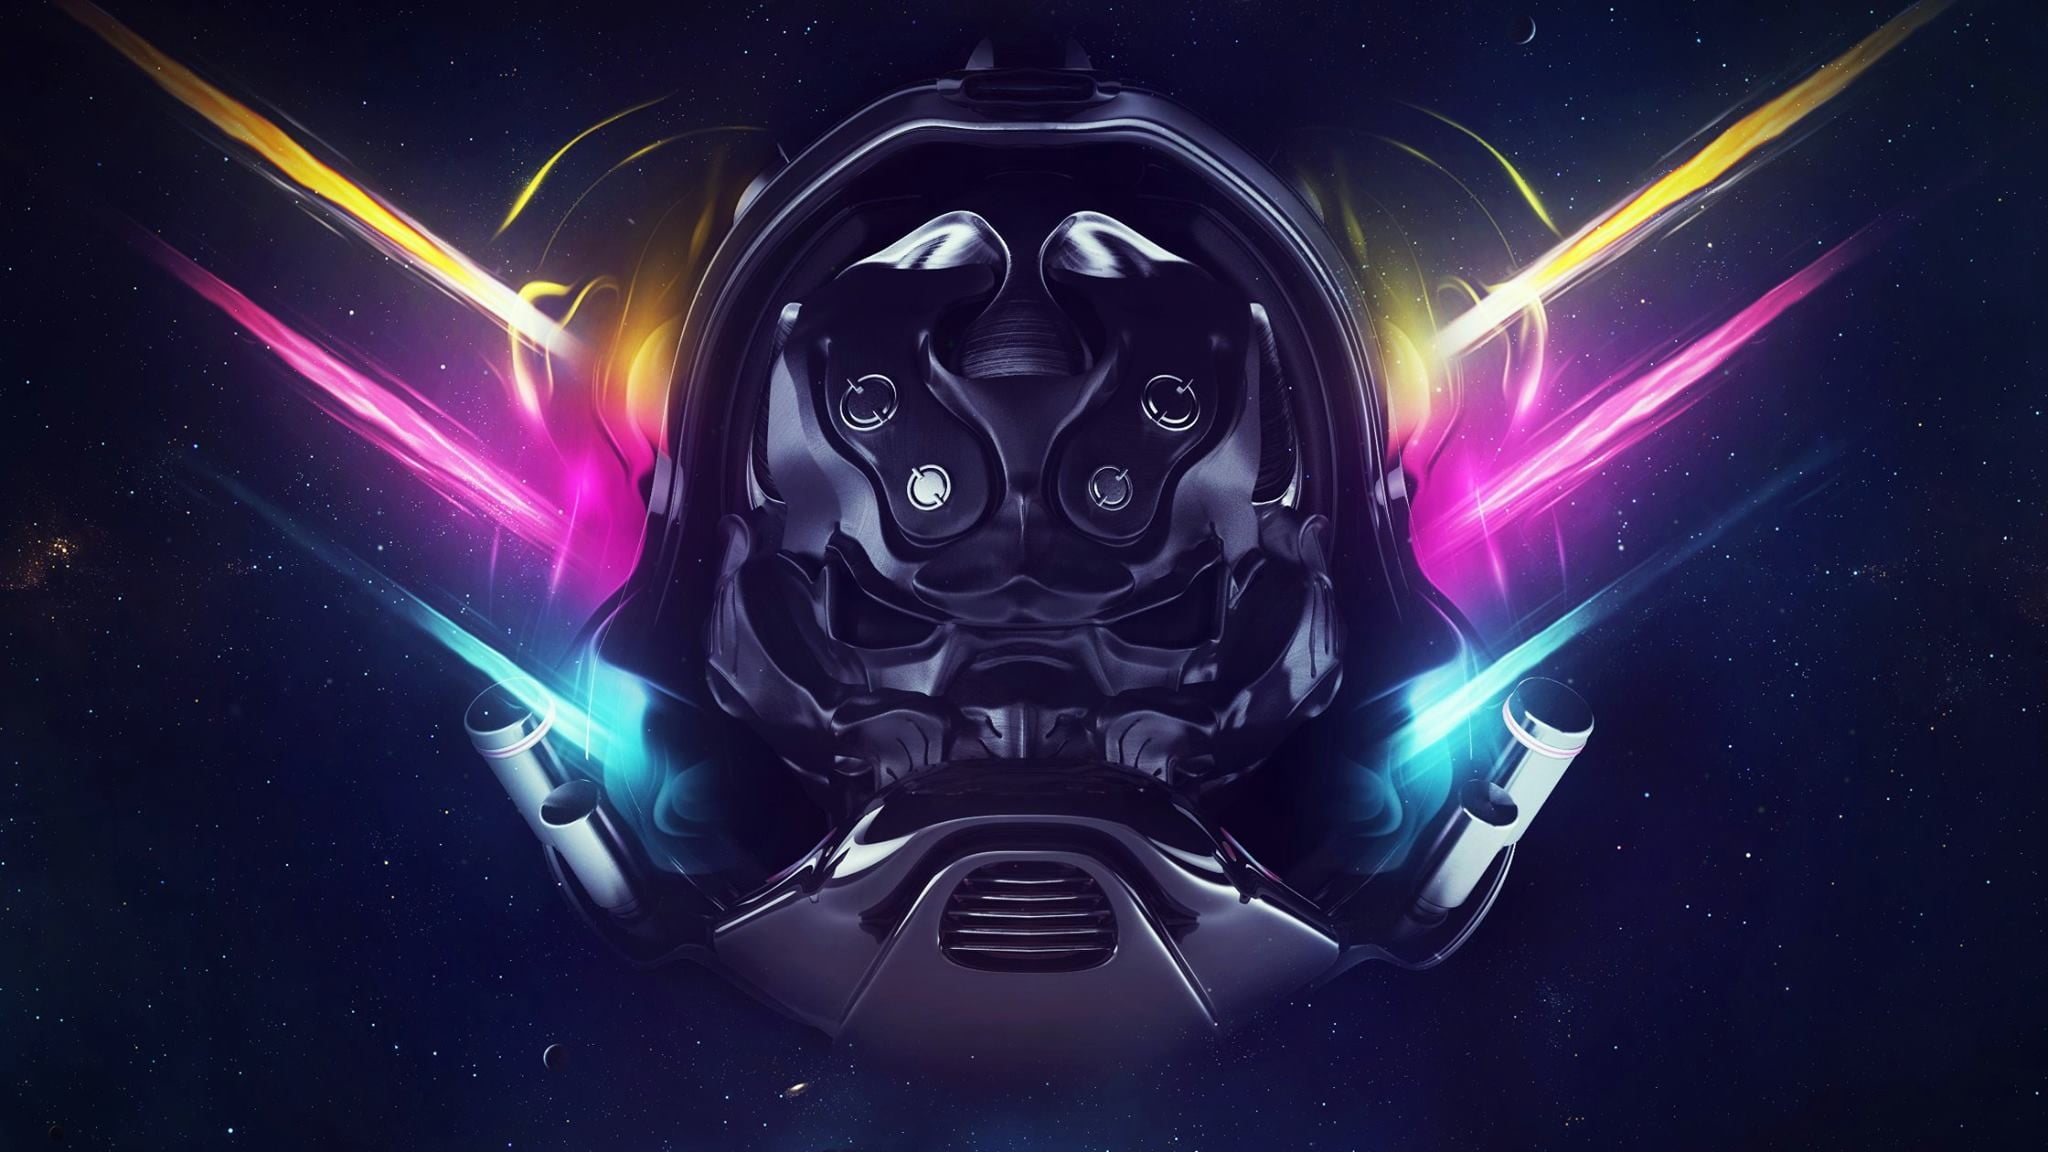 Star Wars poster, abstract, colorful